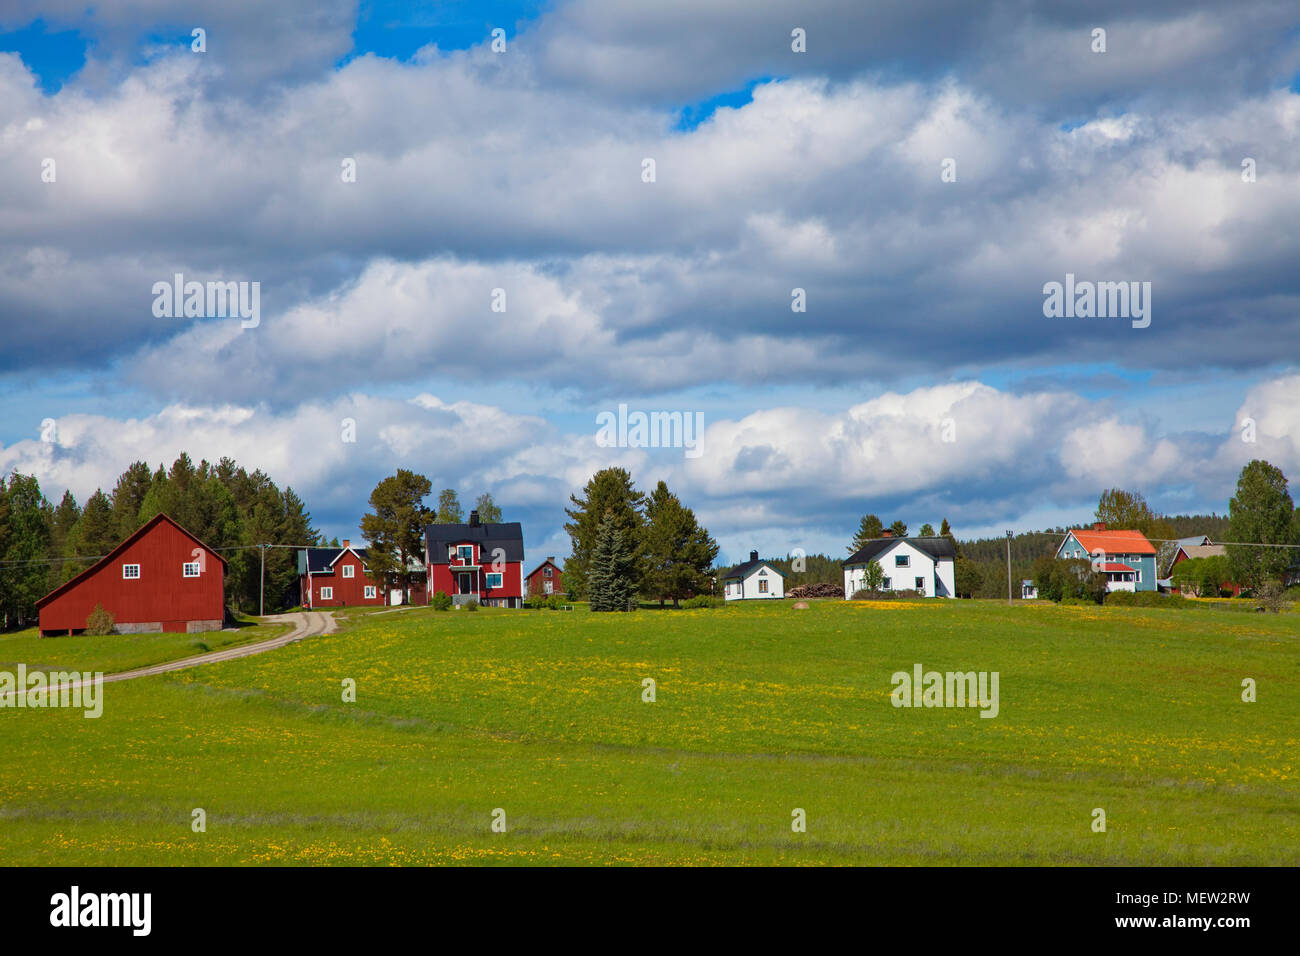 Rural Swedish village with flowering meadows on a sunny summer day under a blue sky with towering cumulus clouds, Stock Photo